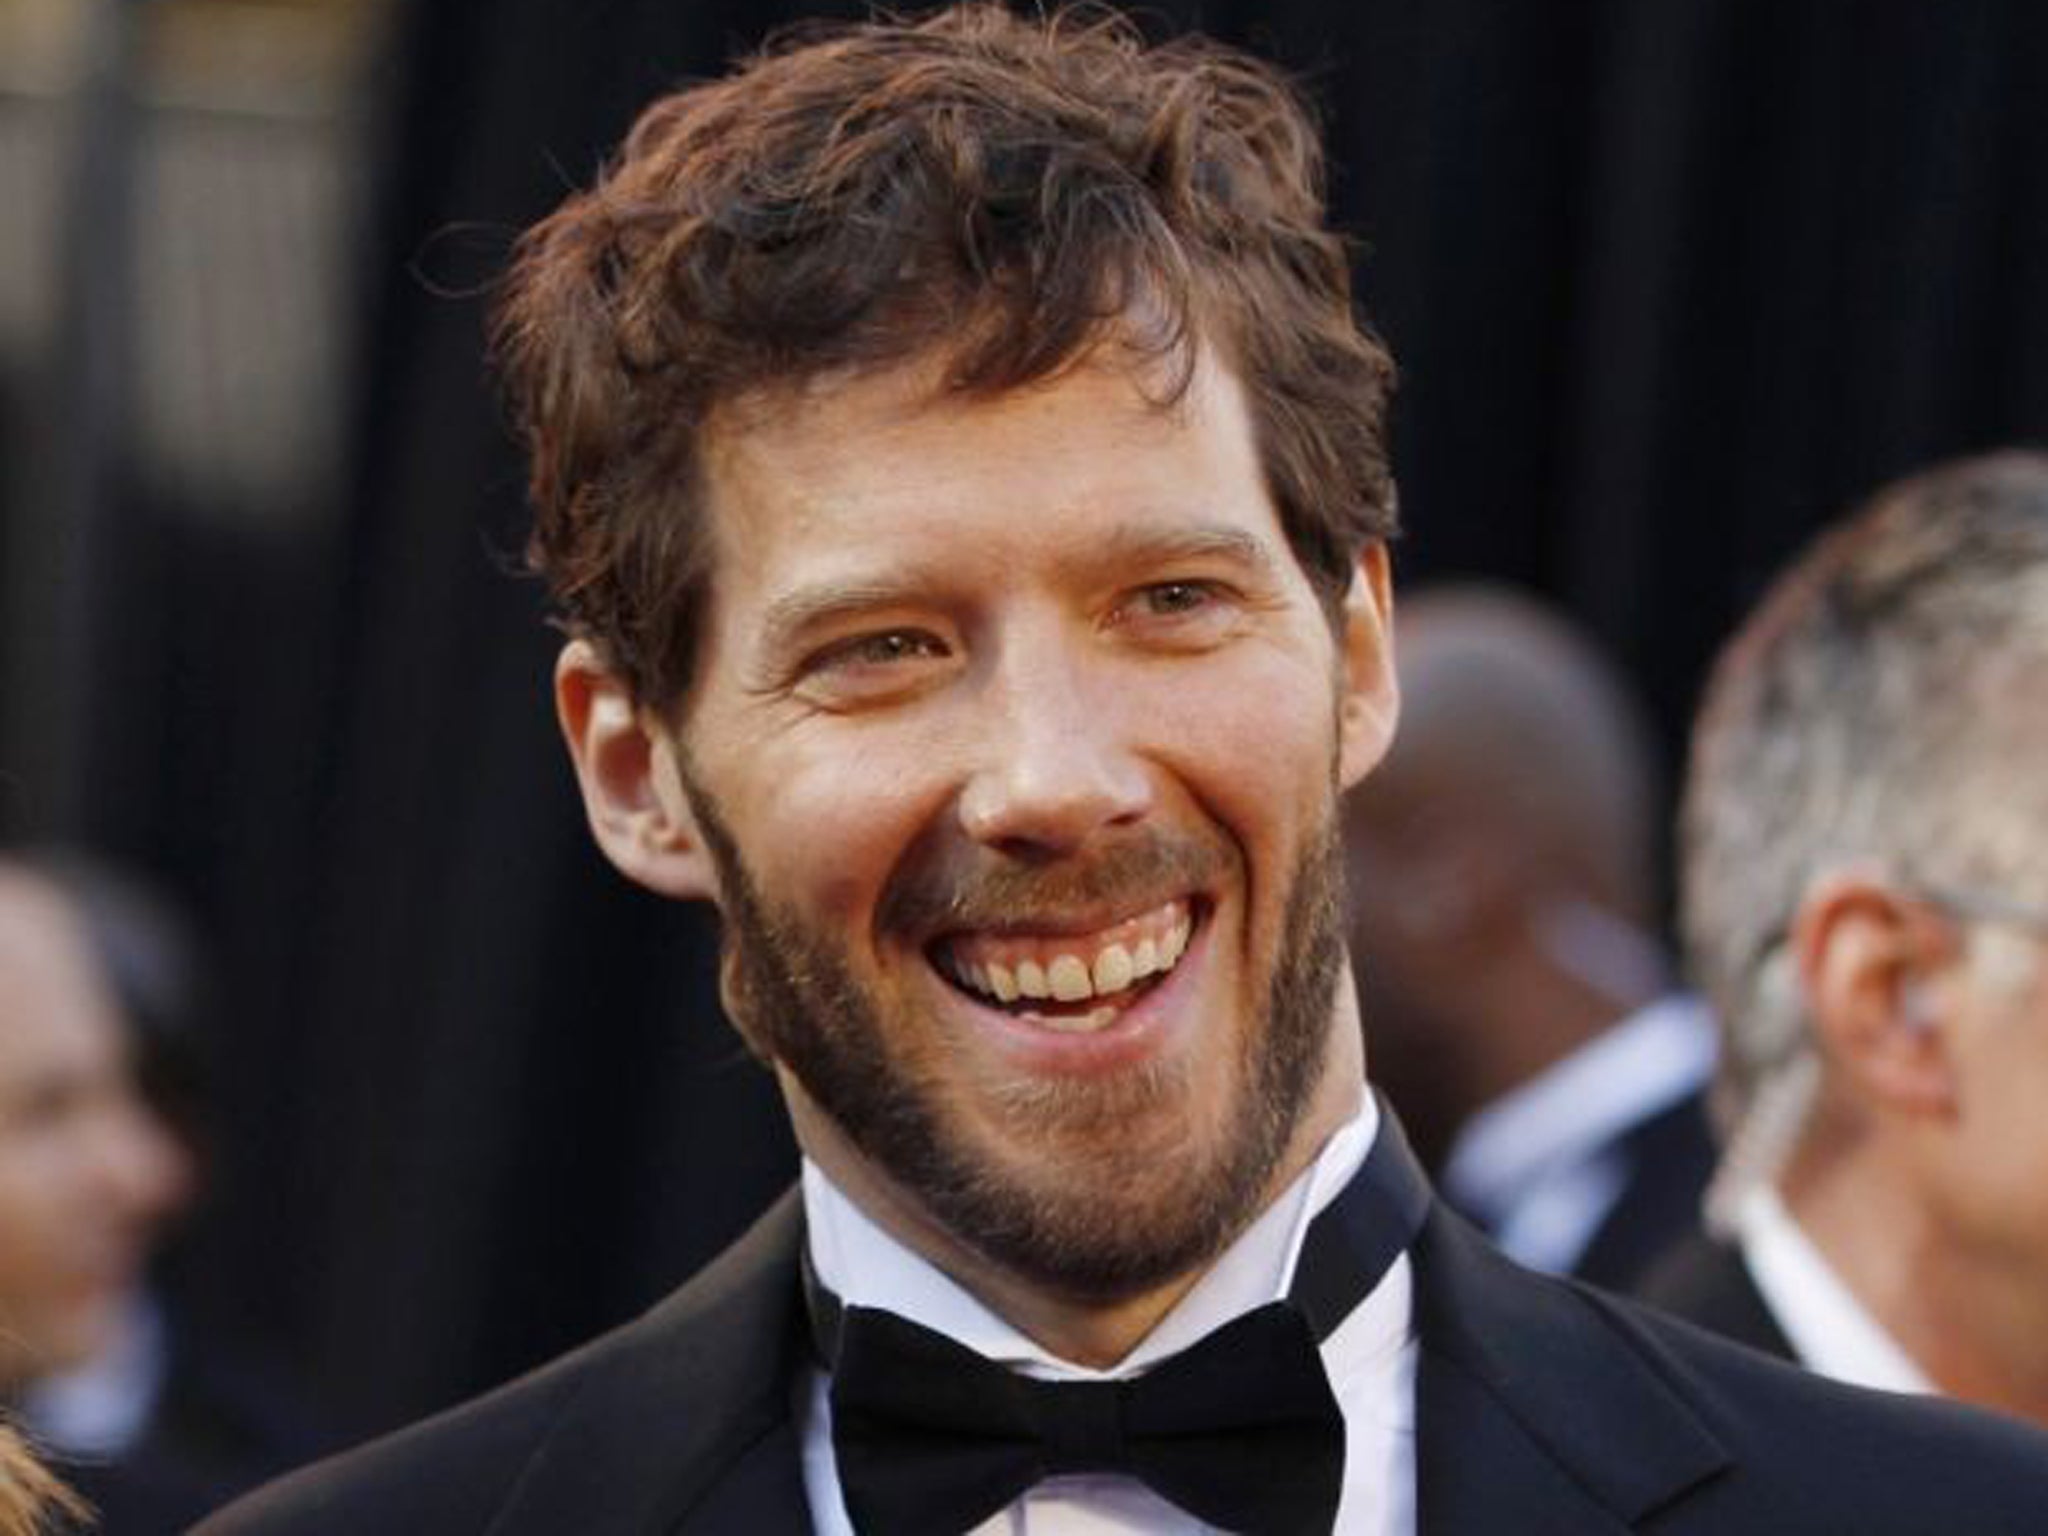 Aron Ralston at the 83rd Academy Awards in Hollywood in 2011